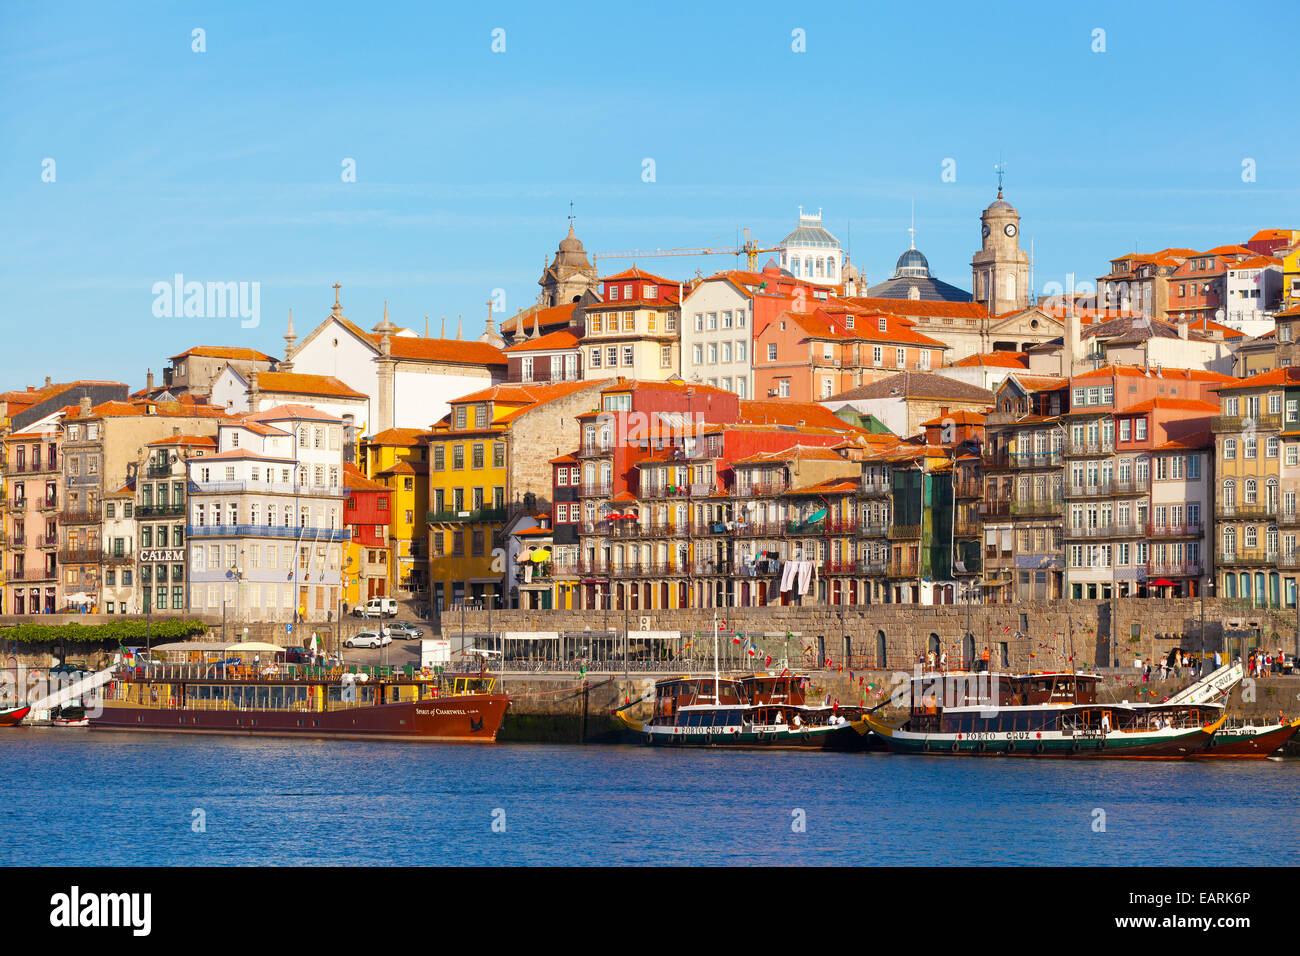 Ribeyr's region in Porto, Portugal, early in the morning Stock Photo